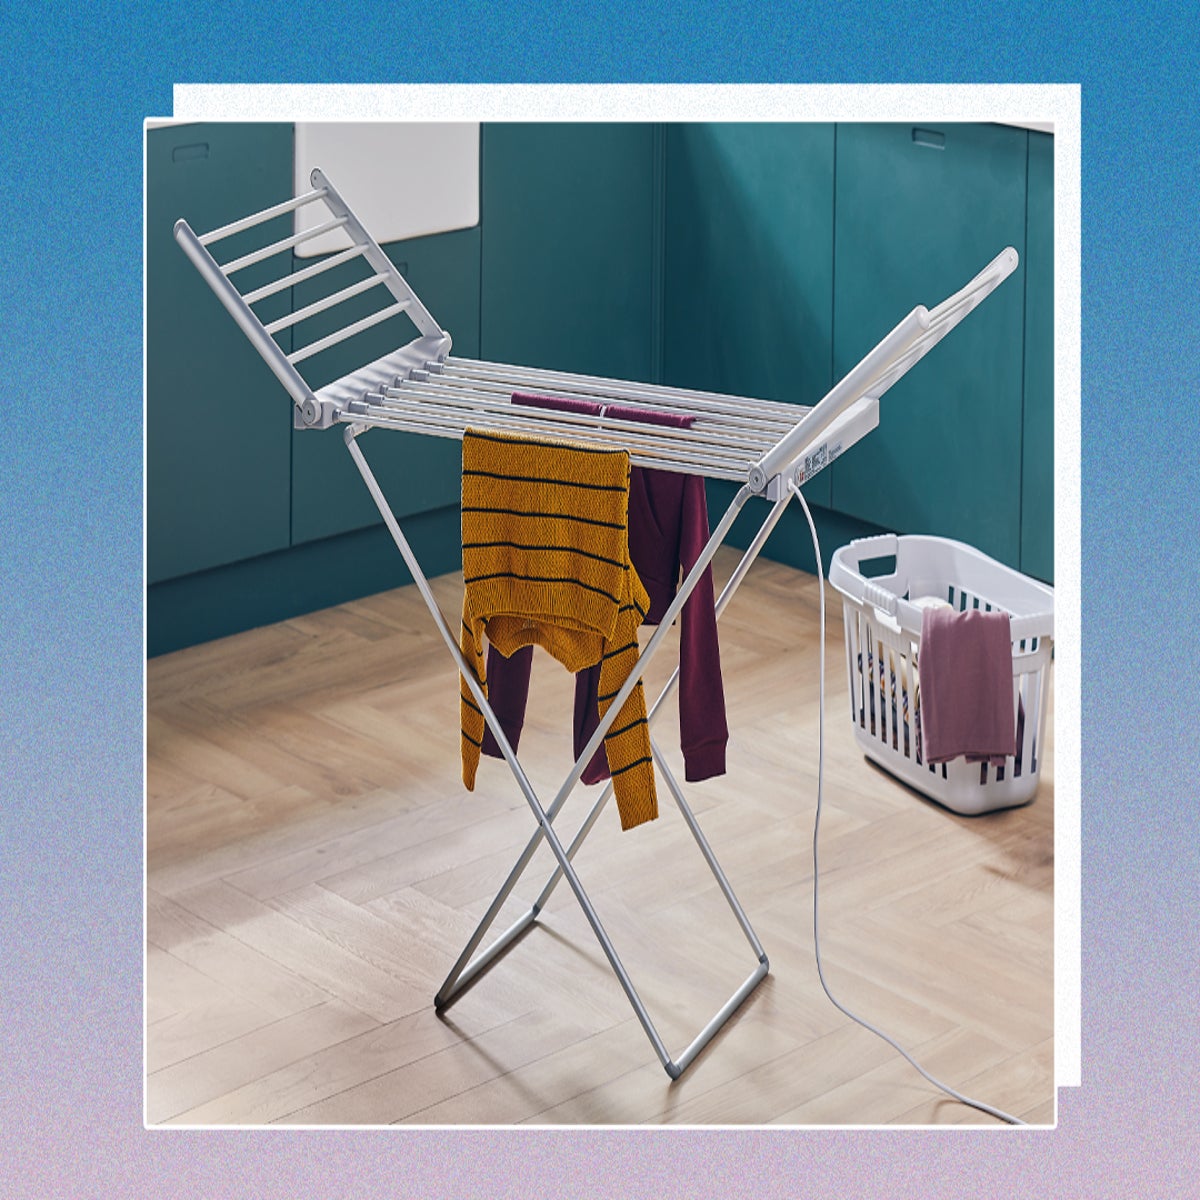 Dunelm's heated clothes dryer that costs 7p to run and 'warms your room' -  Edinburgh Live